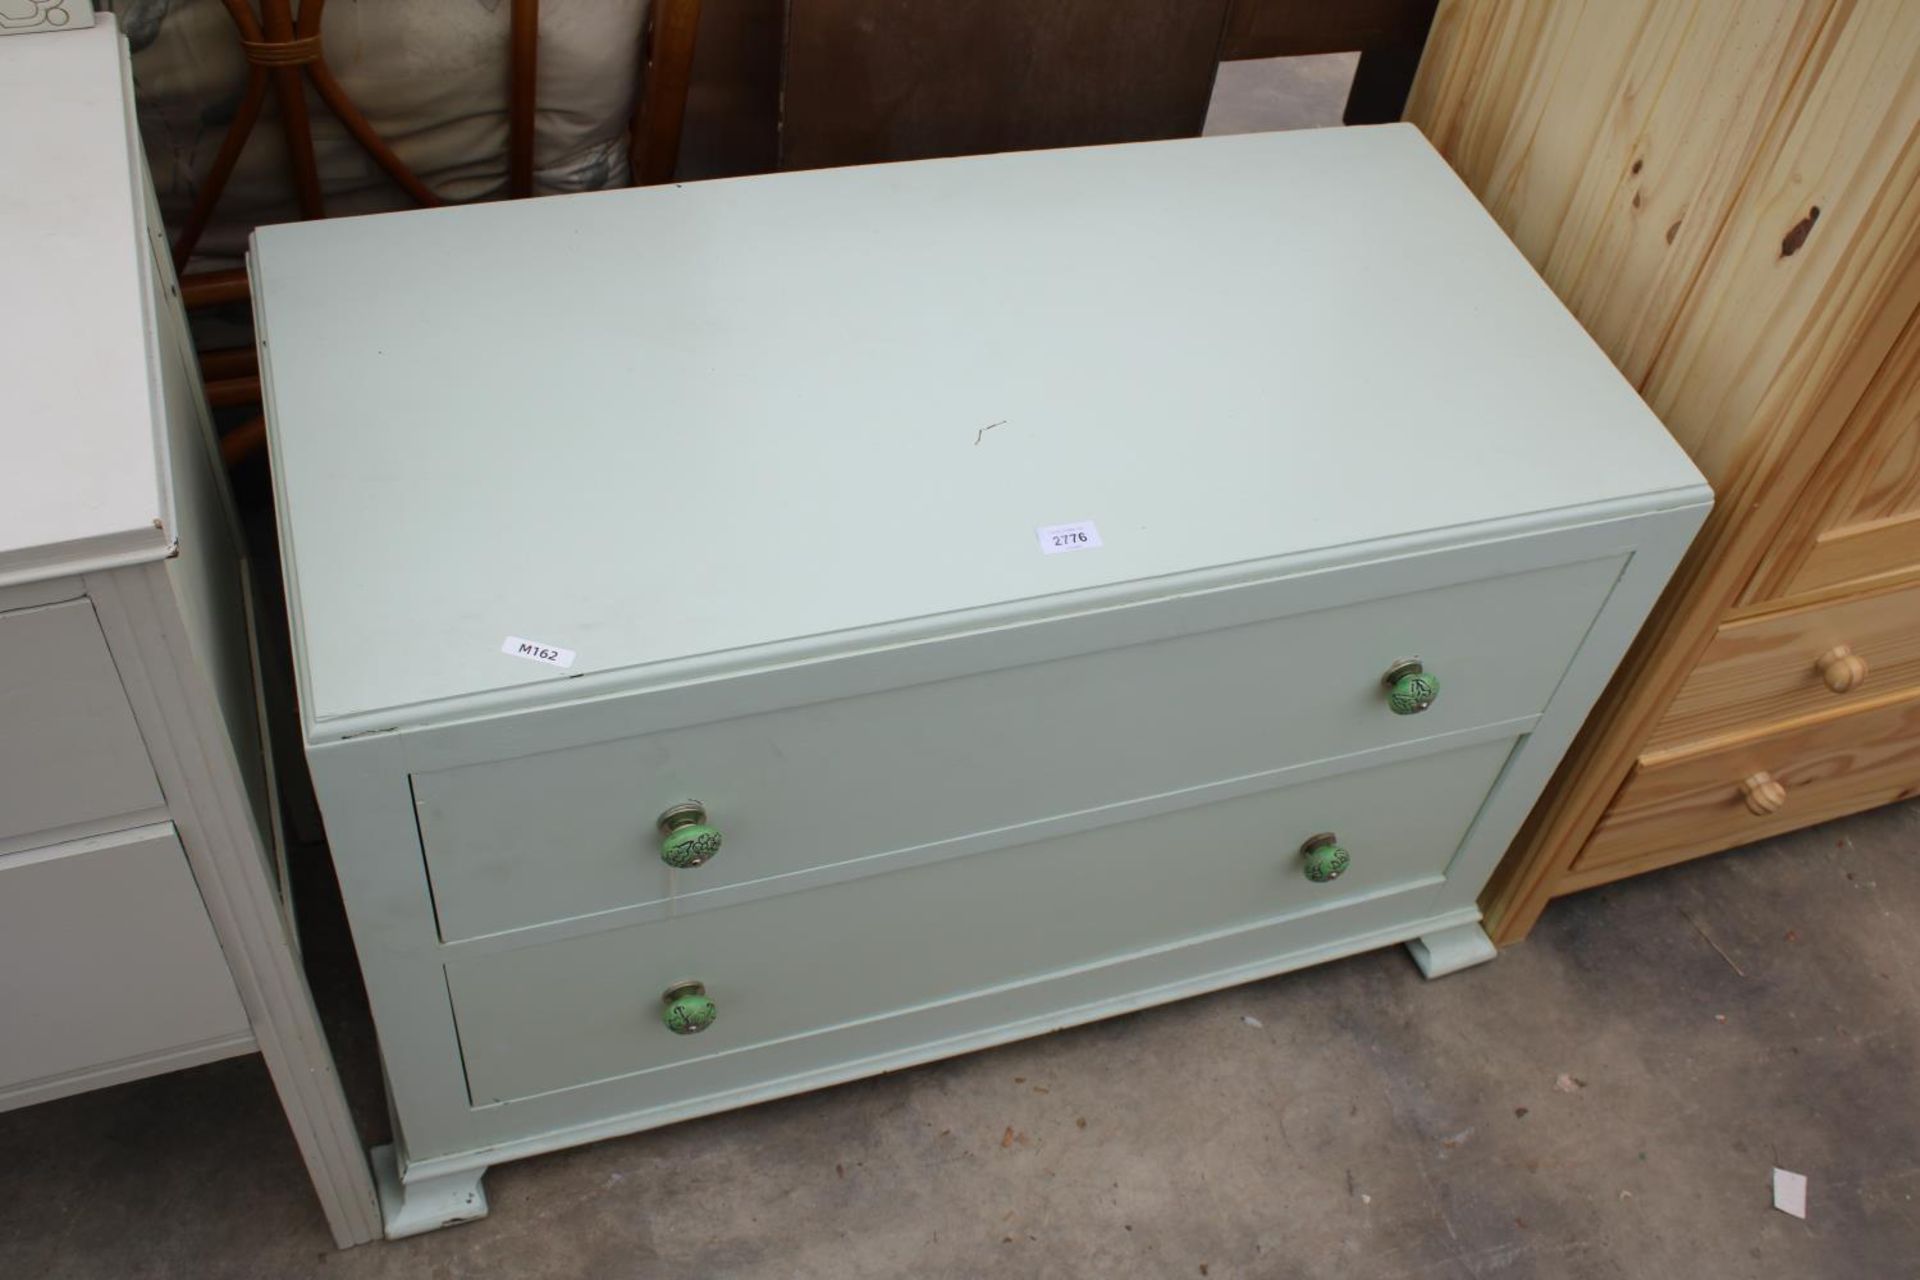 TWO MID 20TH CENTURY PAINTED CHESTS OF DRAWERS WITH MATCHING KNOBS, 36" WID EACH - Image 3 of 4